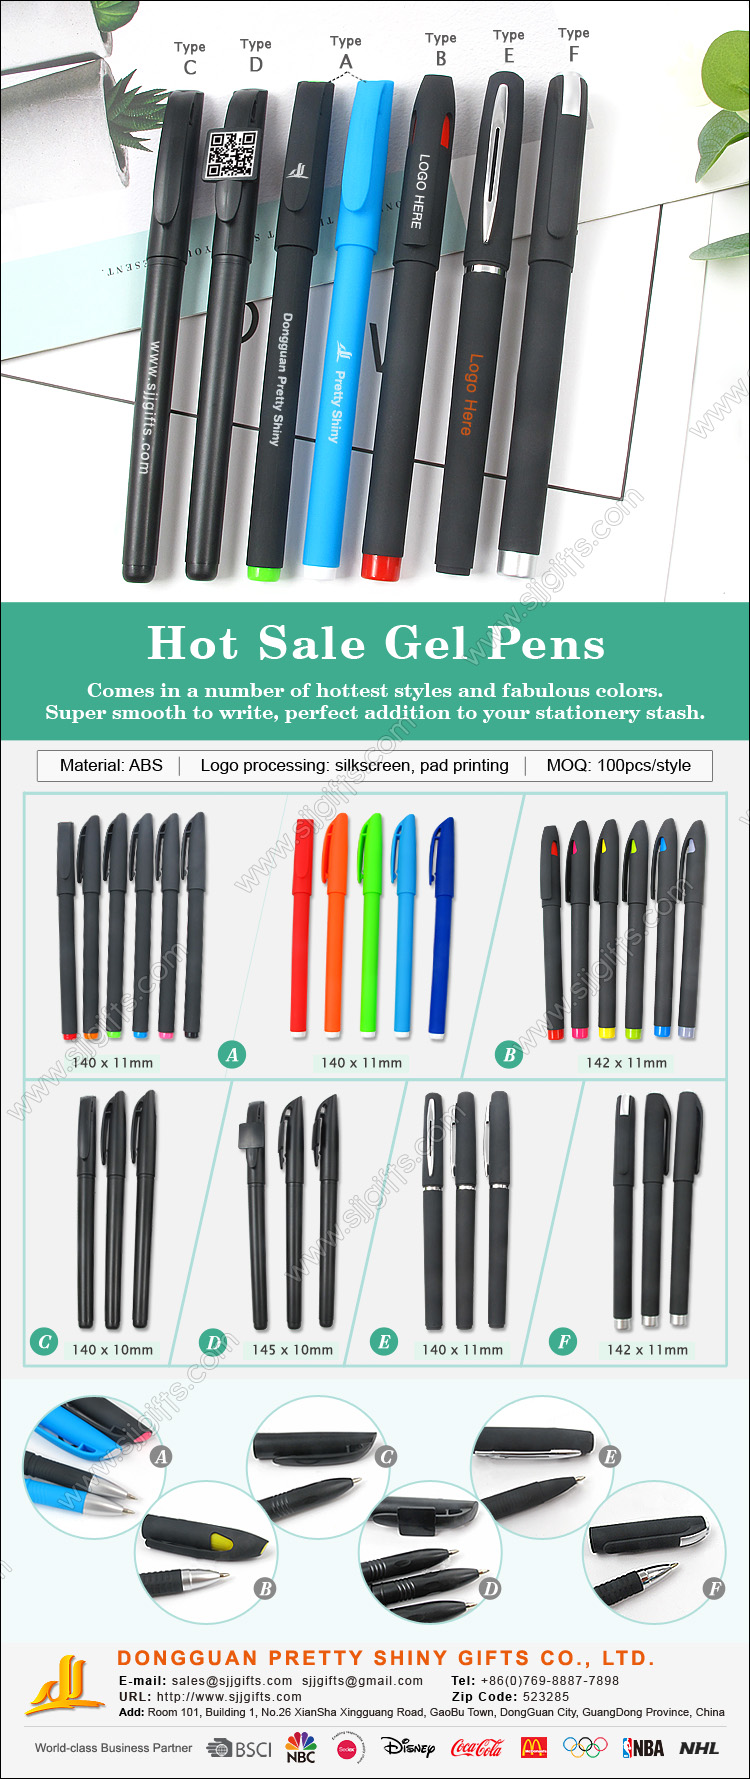 China factory specializing in producing various styles of custom gel pens.